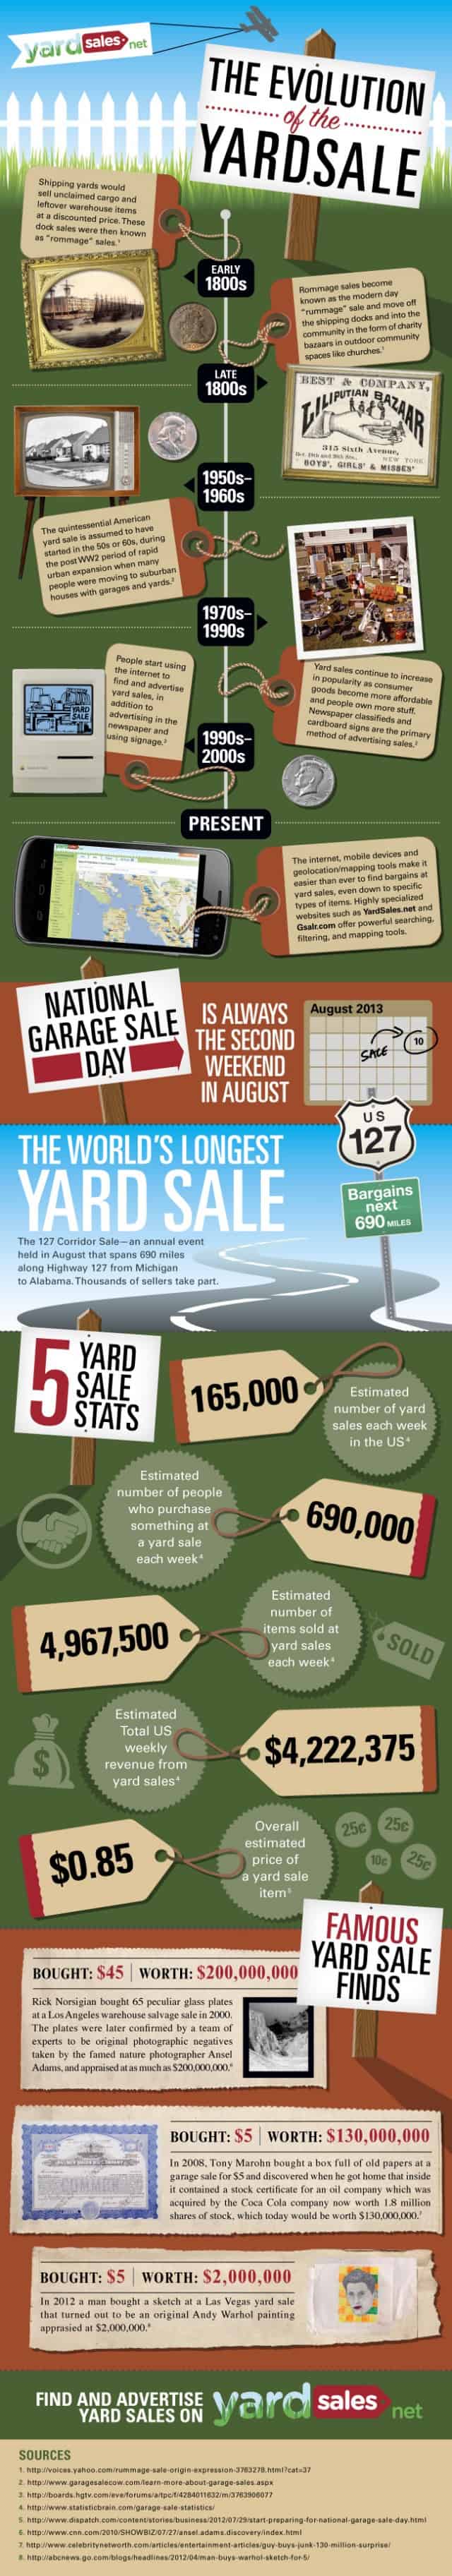 Evolution of the Yard Sale Infographic